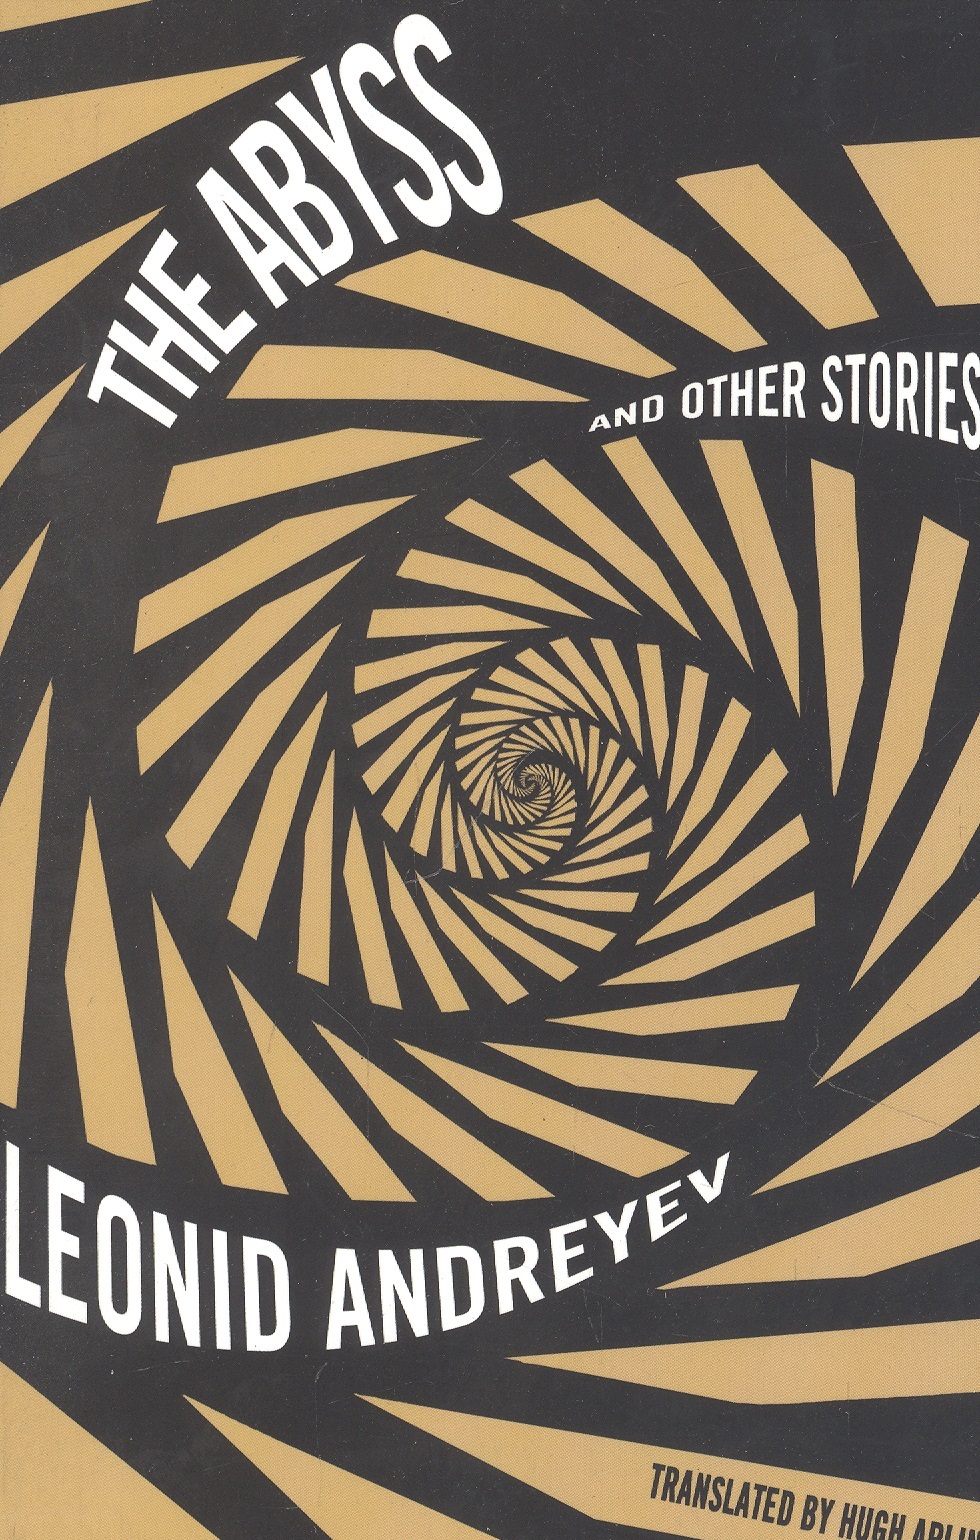 Abyss and Other Stories andreyev leonid abyss and other stories